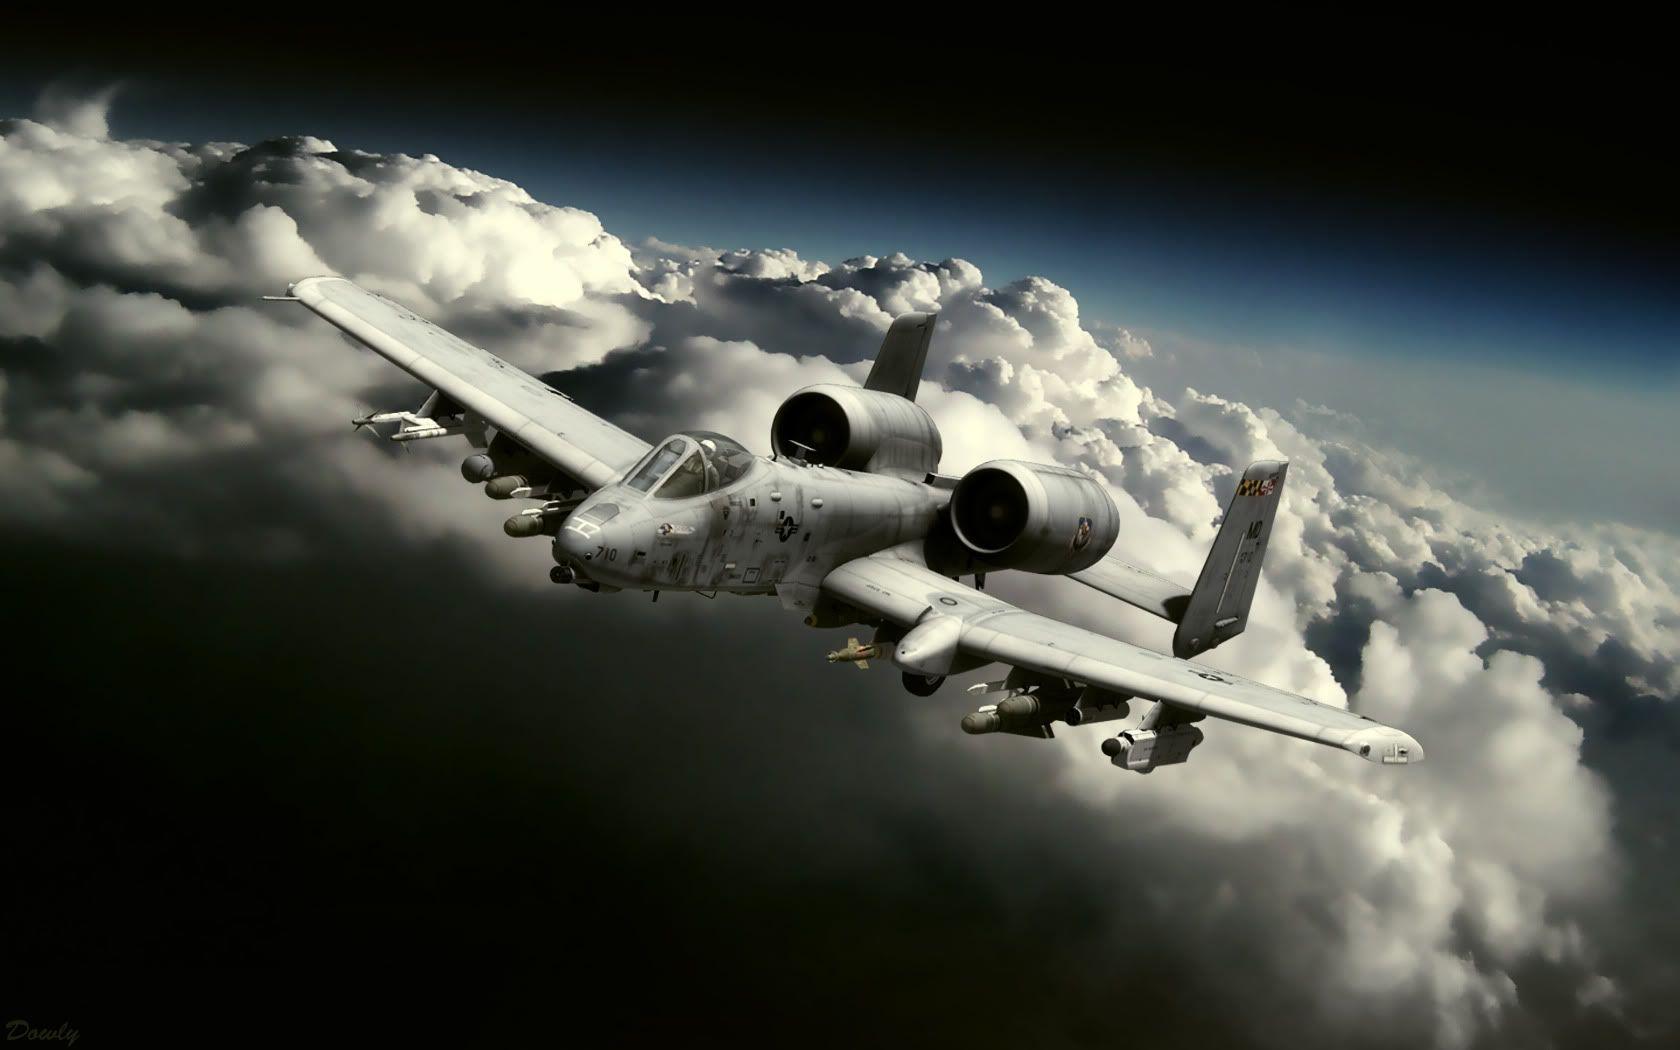 A 10 Warthog Wallpapers Wallpaper Cave